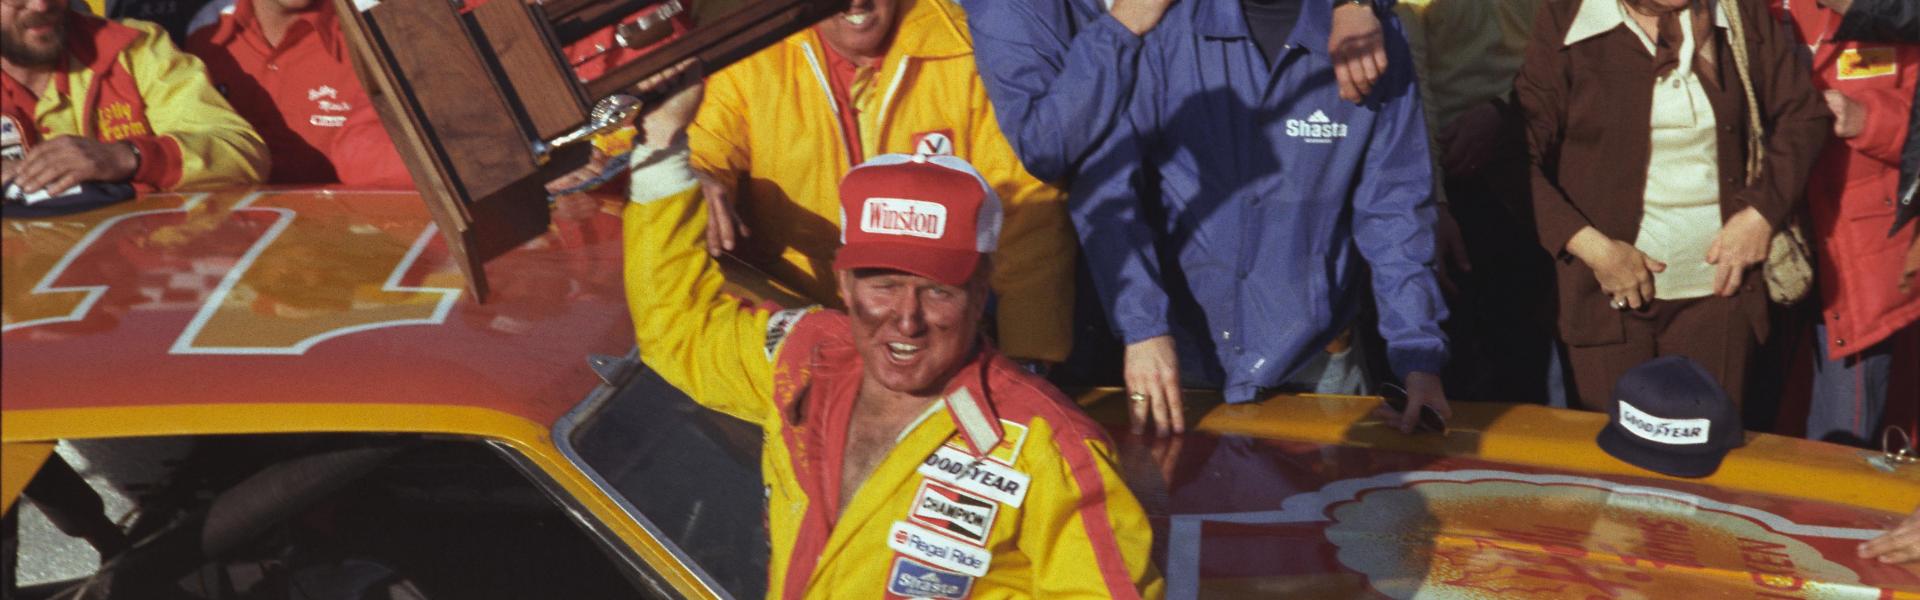 Cale Yarborough scored his first win in 1965 and drove on to win three series championships in the 1970s.